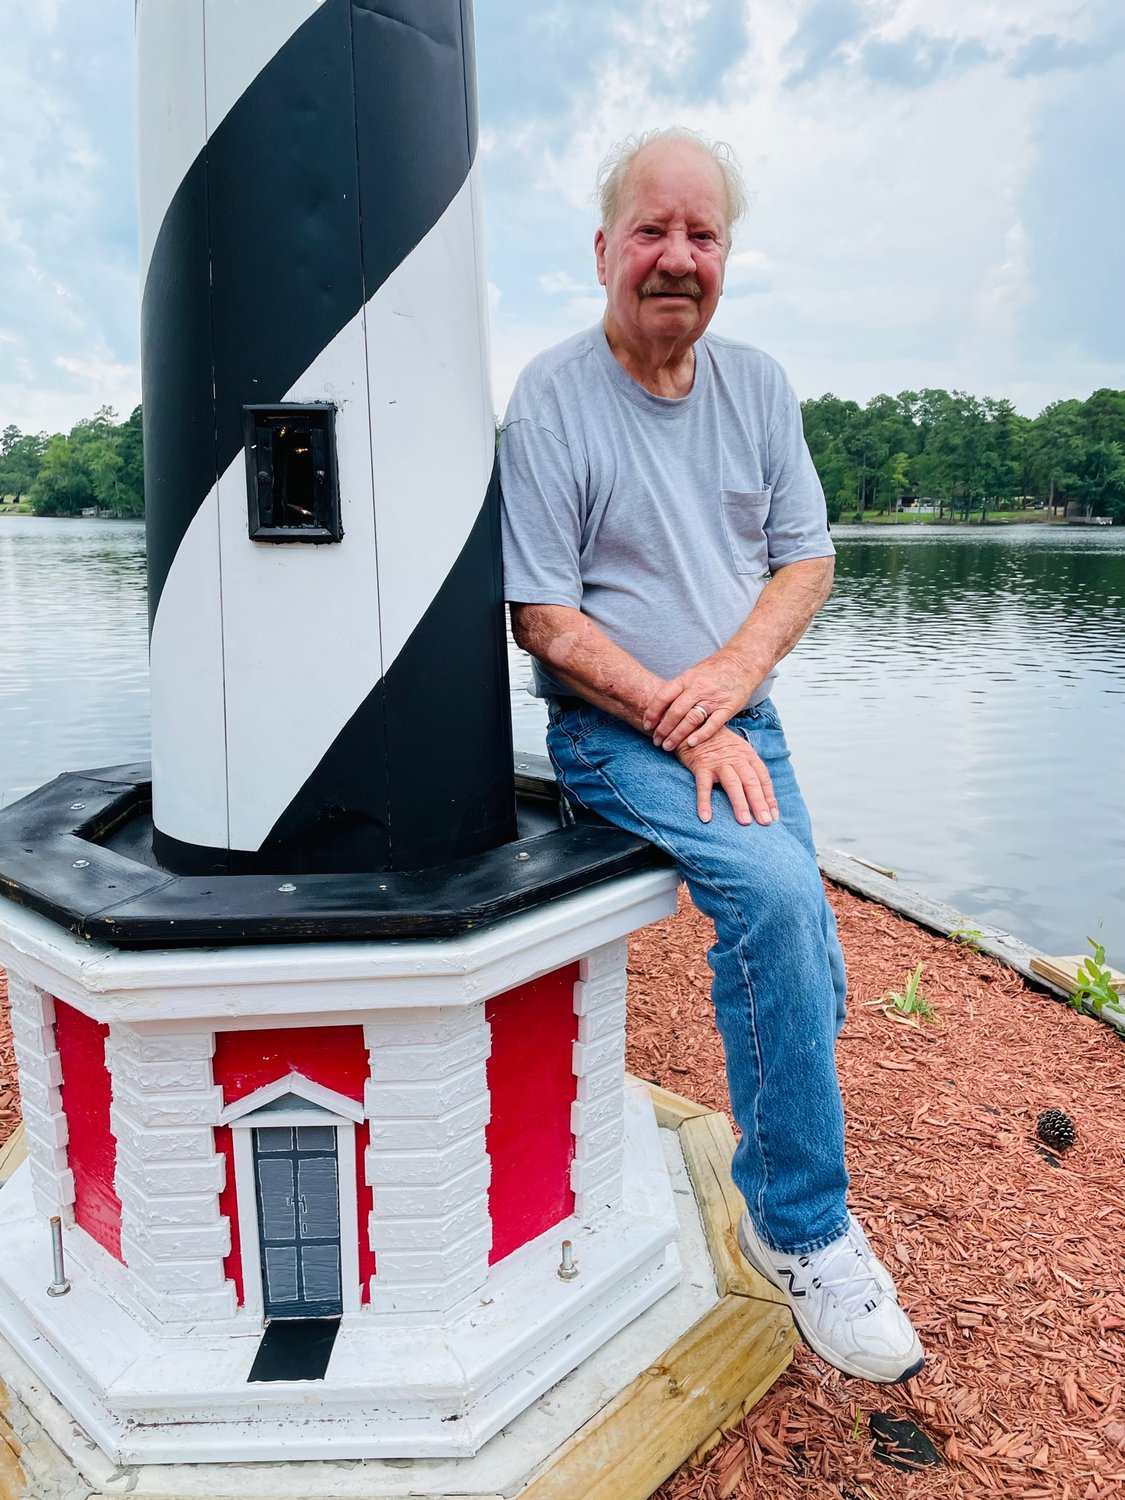 ' I knew it was special to him,' Elbert "Rex'' Lucas said of the damaged lighthouse behind his friend's house. 'Something had to be done with it rather than it going to waste.' Lucas, with the help of family and neighbors, worked to restore the lighthouse in memory of his friend Billie Hooks.